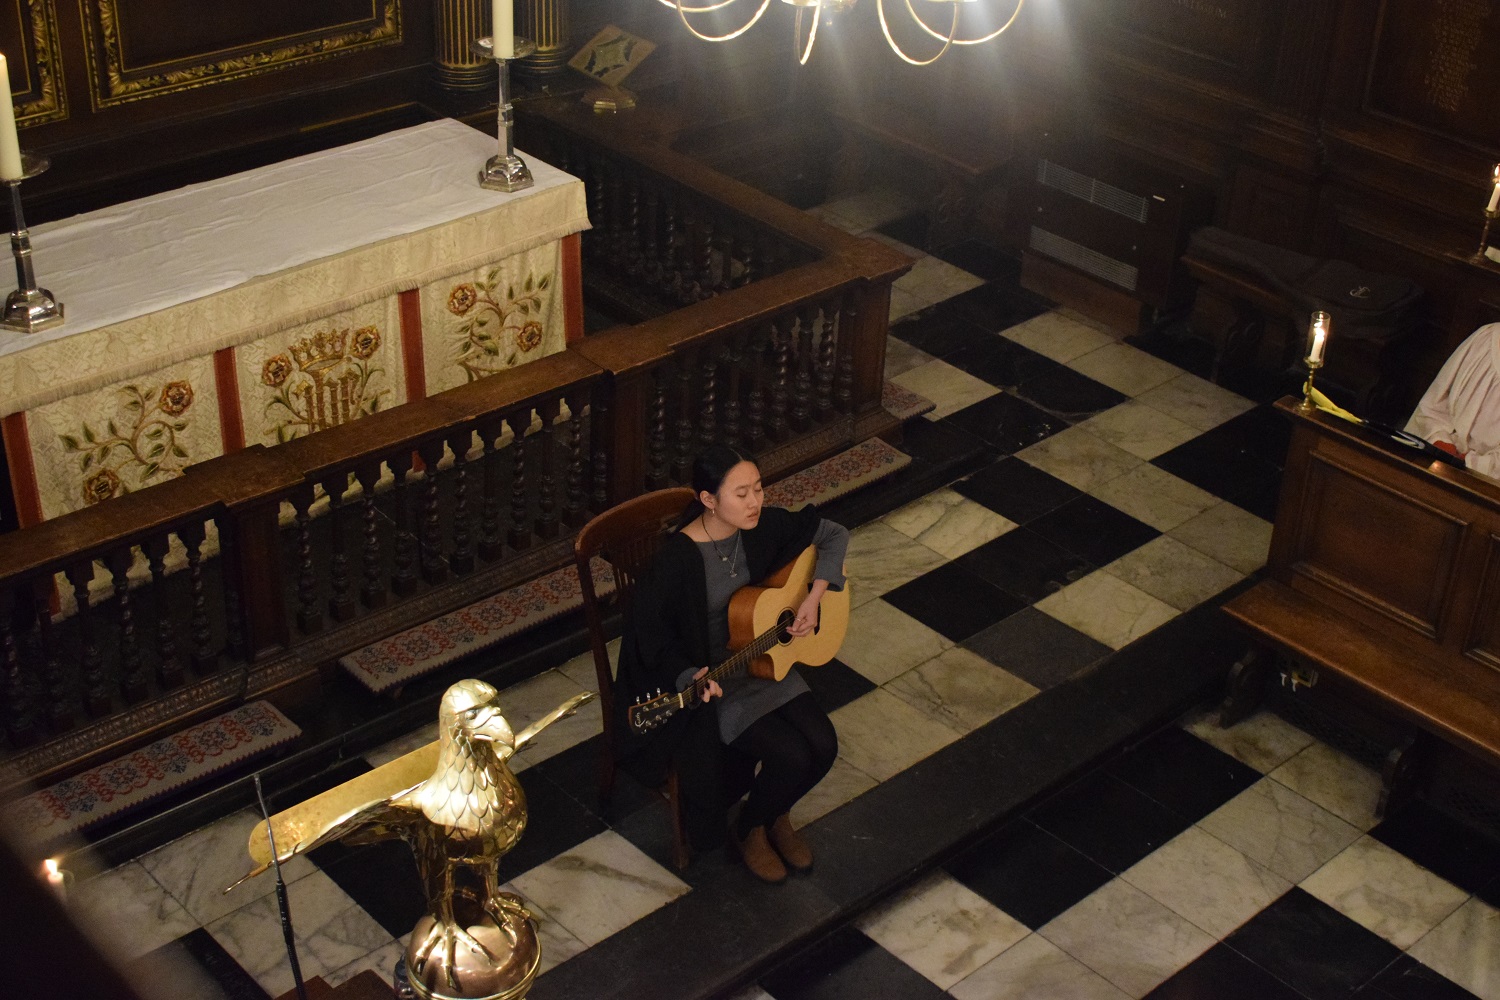 A person playing the guitar in front of an altar